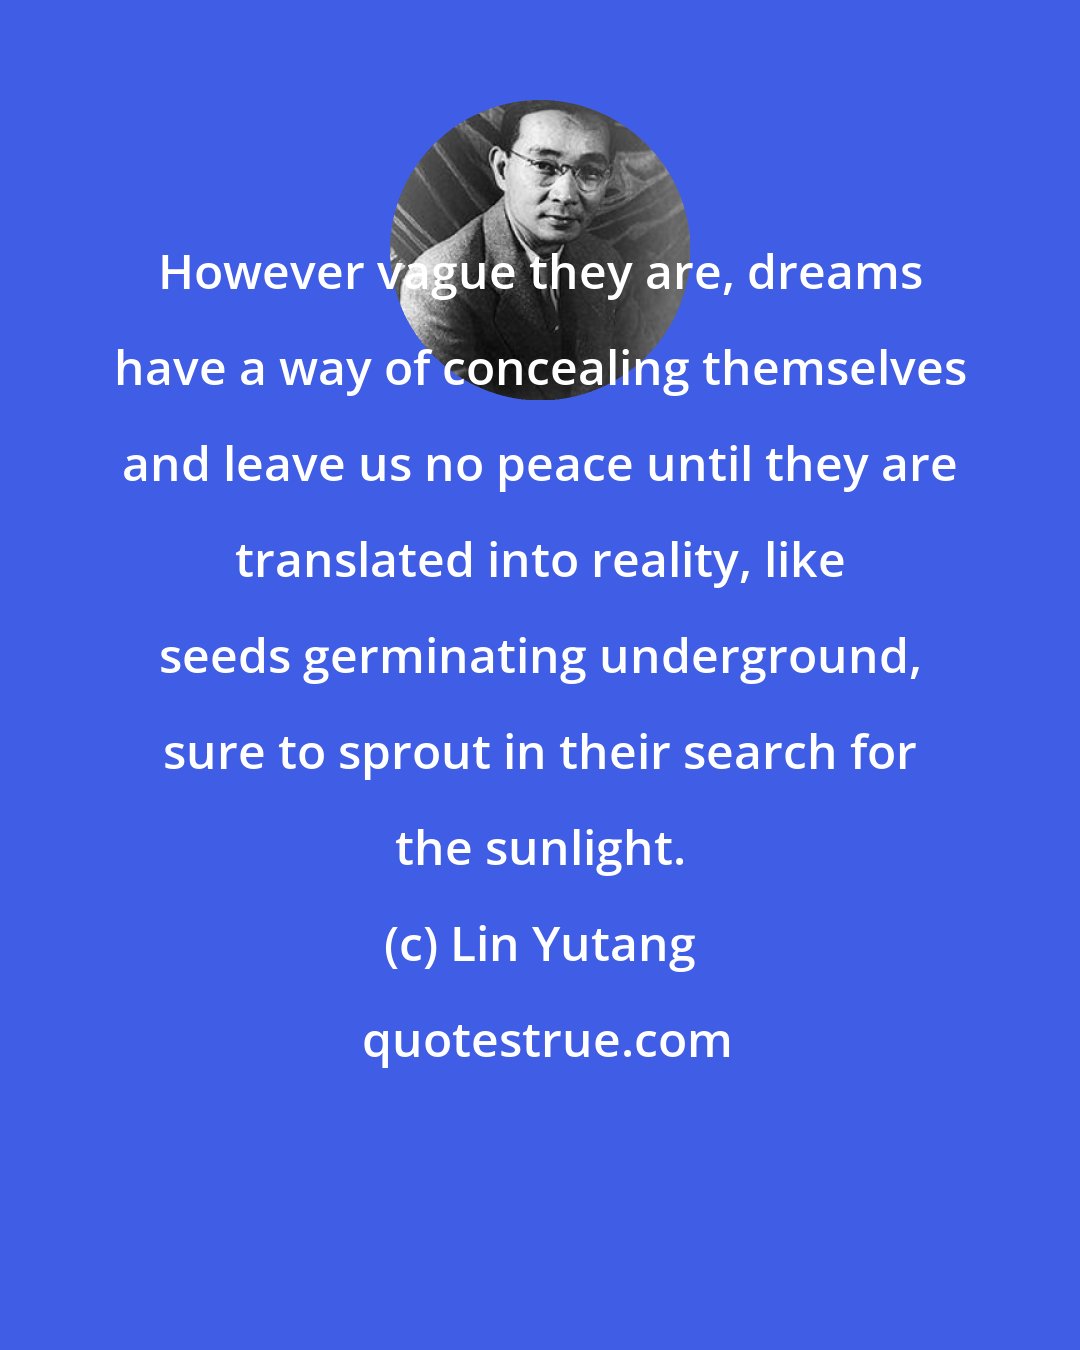 Lin Yutang: However vague they are, dreams have a way of concealing themselves and leave us no peace until they are translated into reality, like seeds germinating underground, sure to sprout in their search for the sunlight.